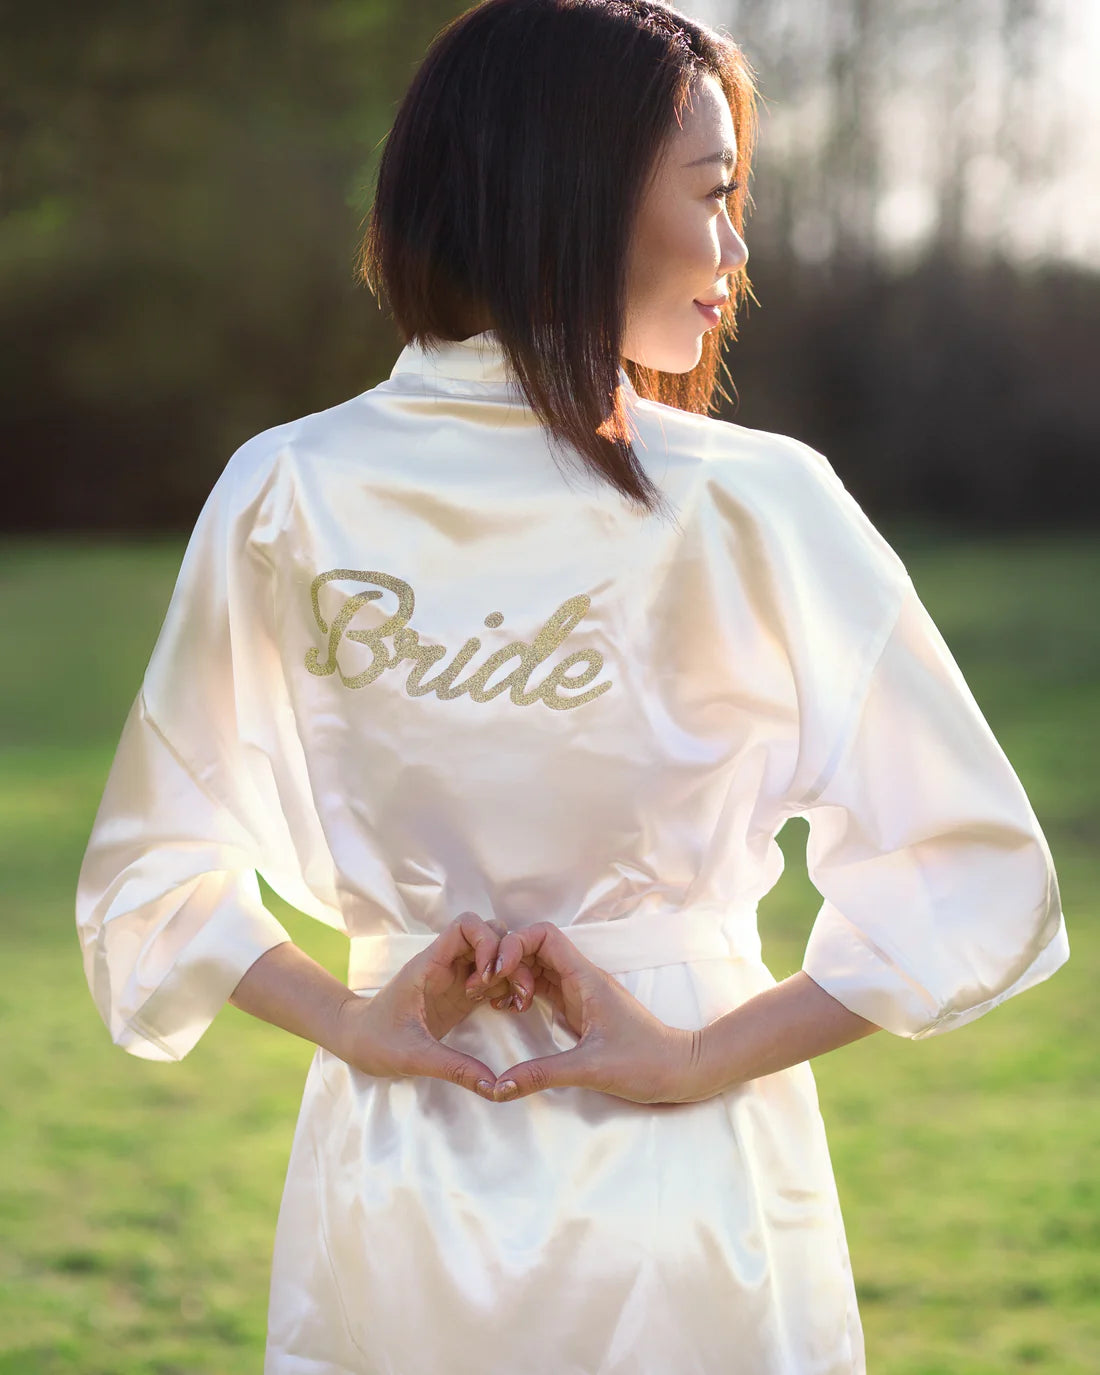 Woman wearing white robe with gold bride lettering on it looking to the side making a heart with her hands on her back, Shop T.K.S